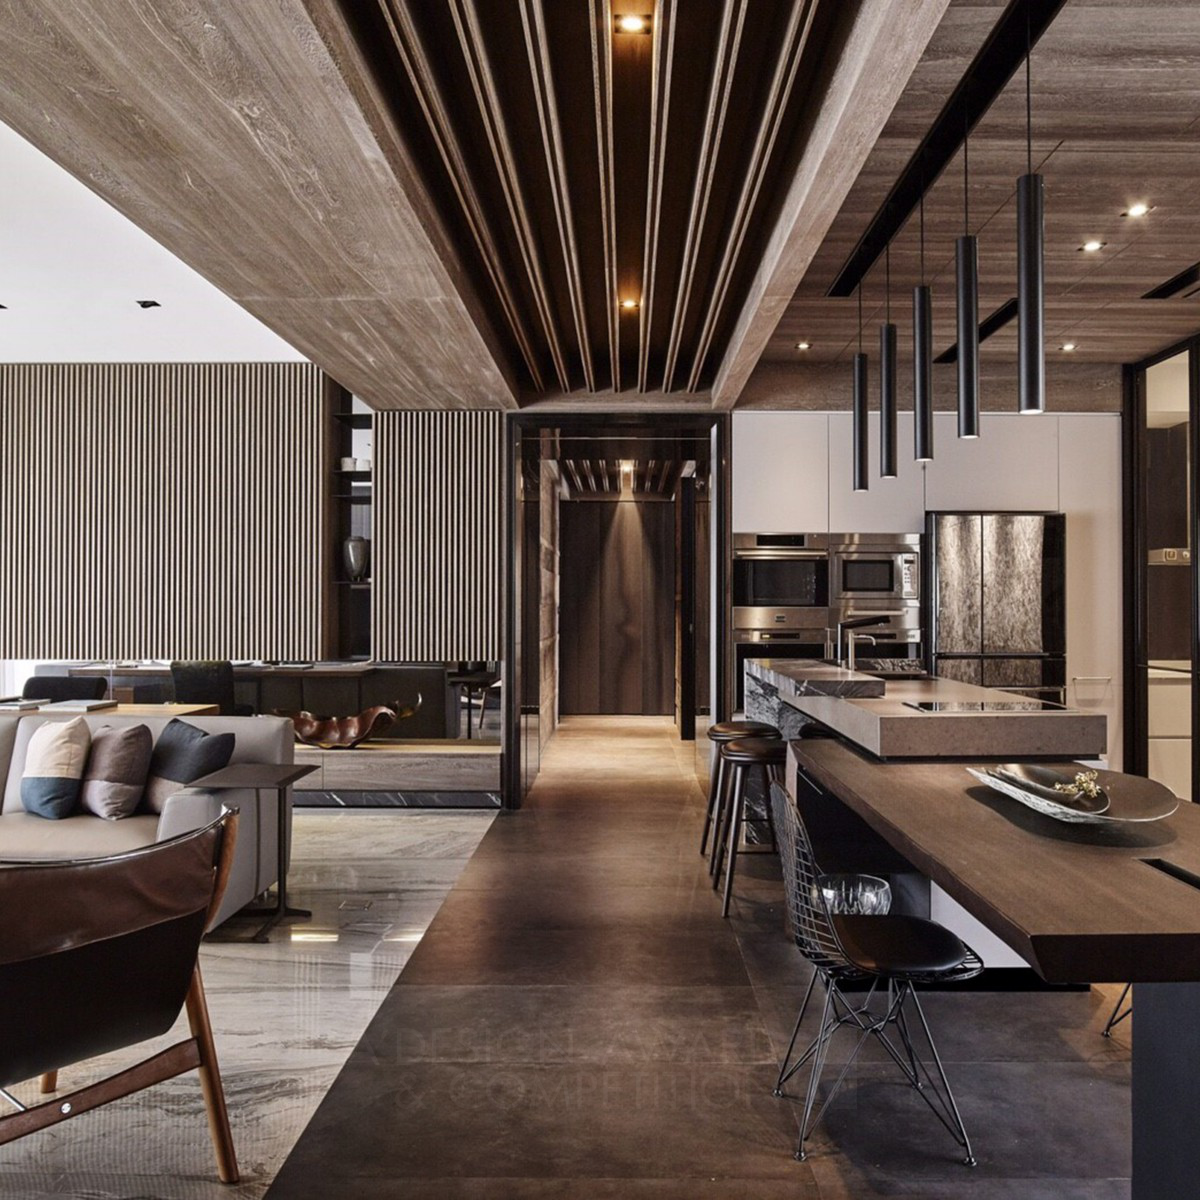 A wrinkle in time Residential by Tang, chung-han